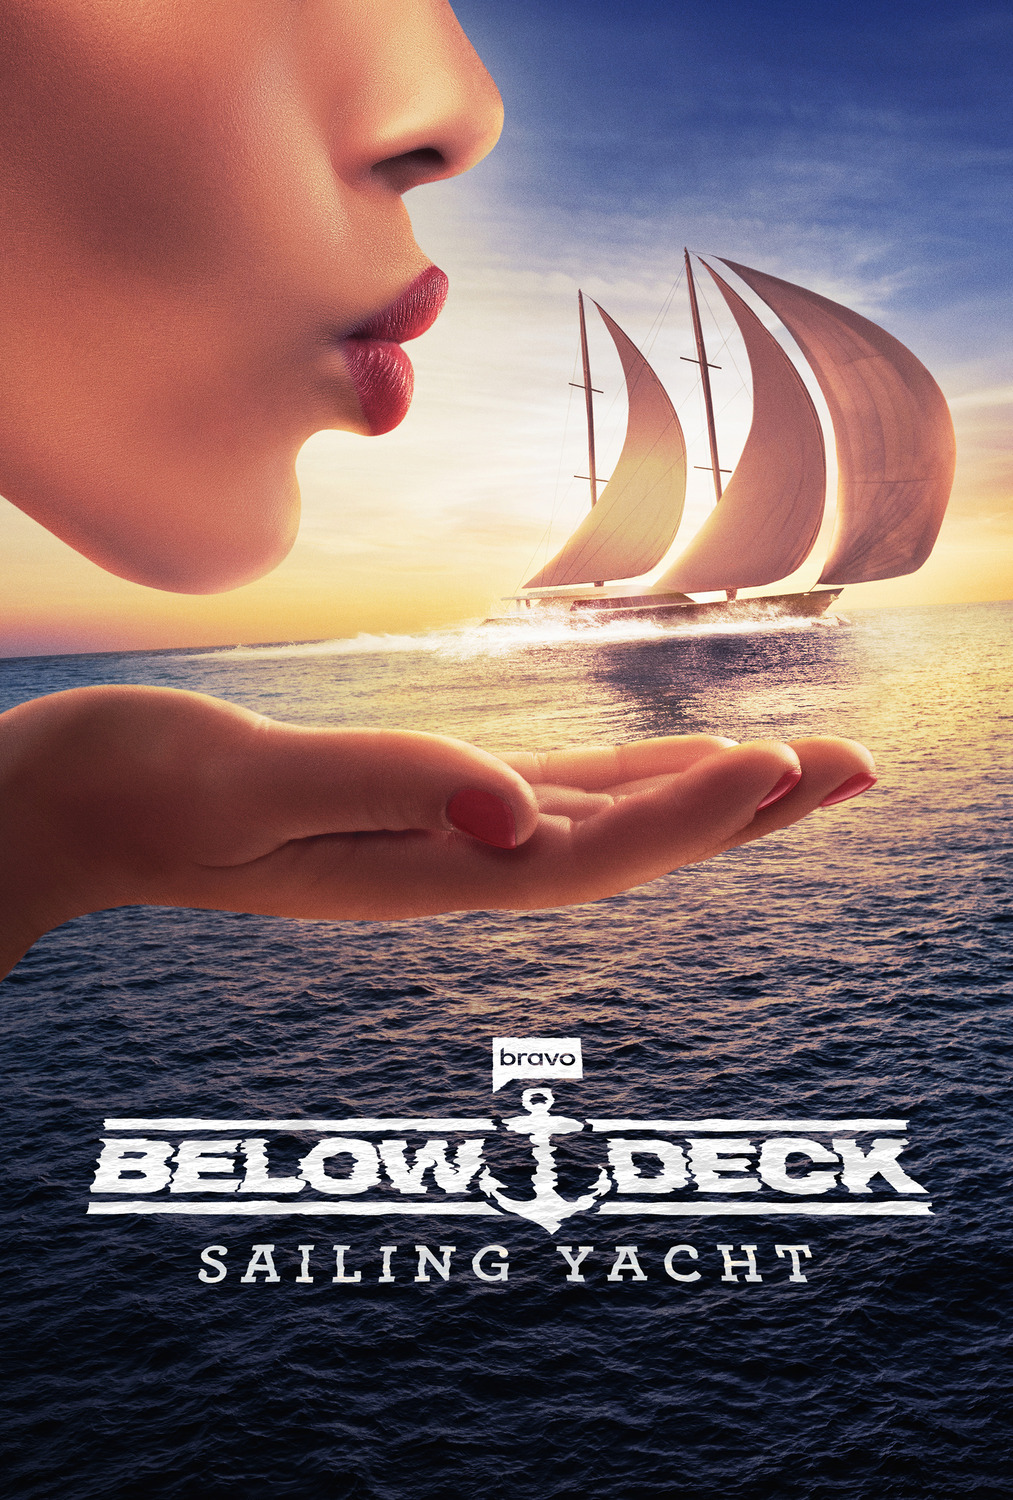 Extra Large TV Poster Image for Below Deck Sailing Yacht 